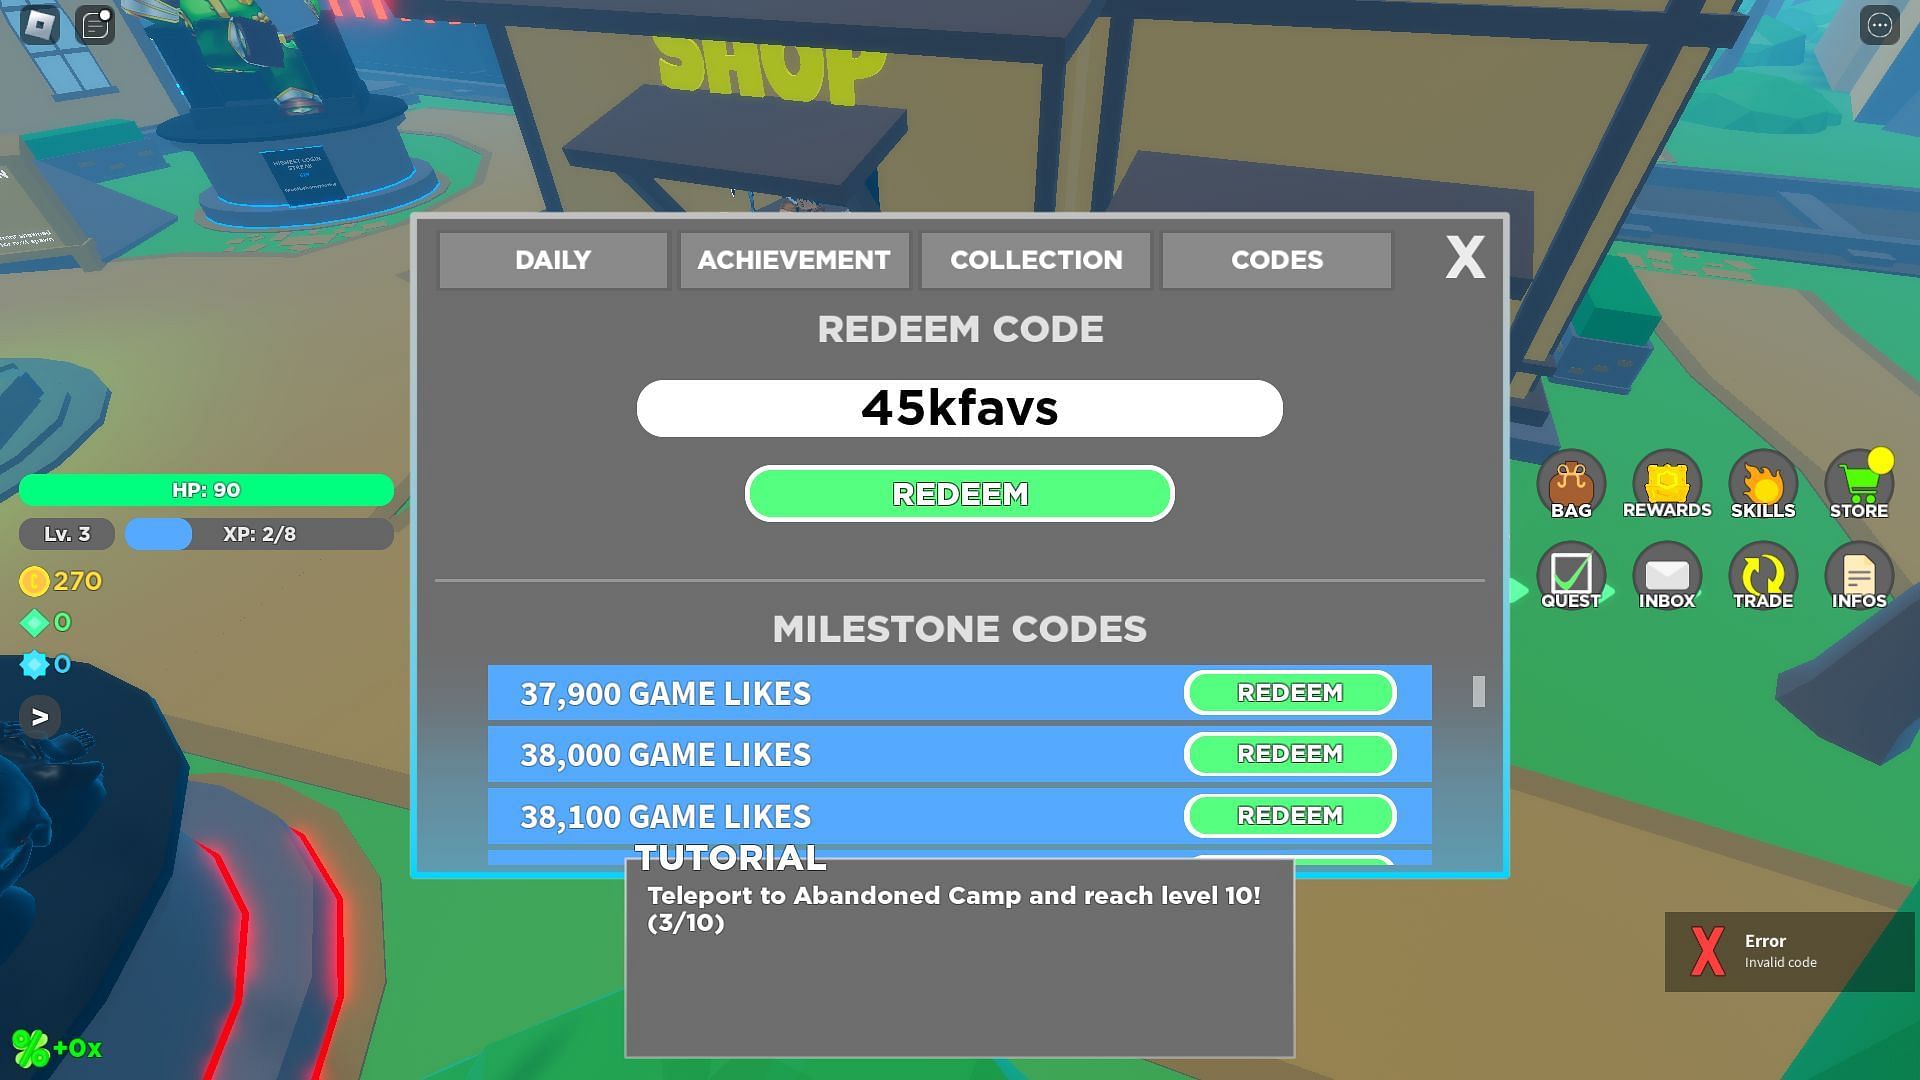 Troubleshooting codes for RPG Champions (Image via Roblox)